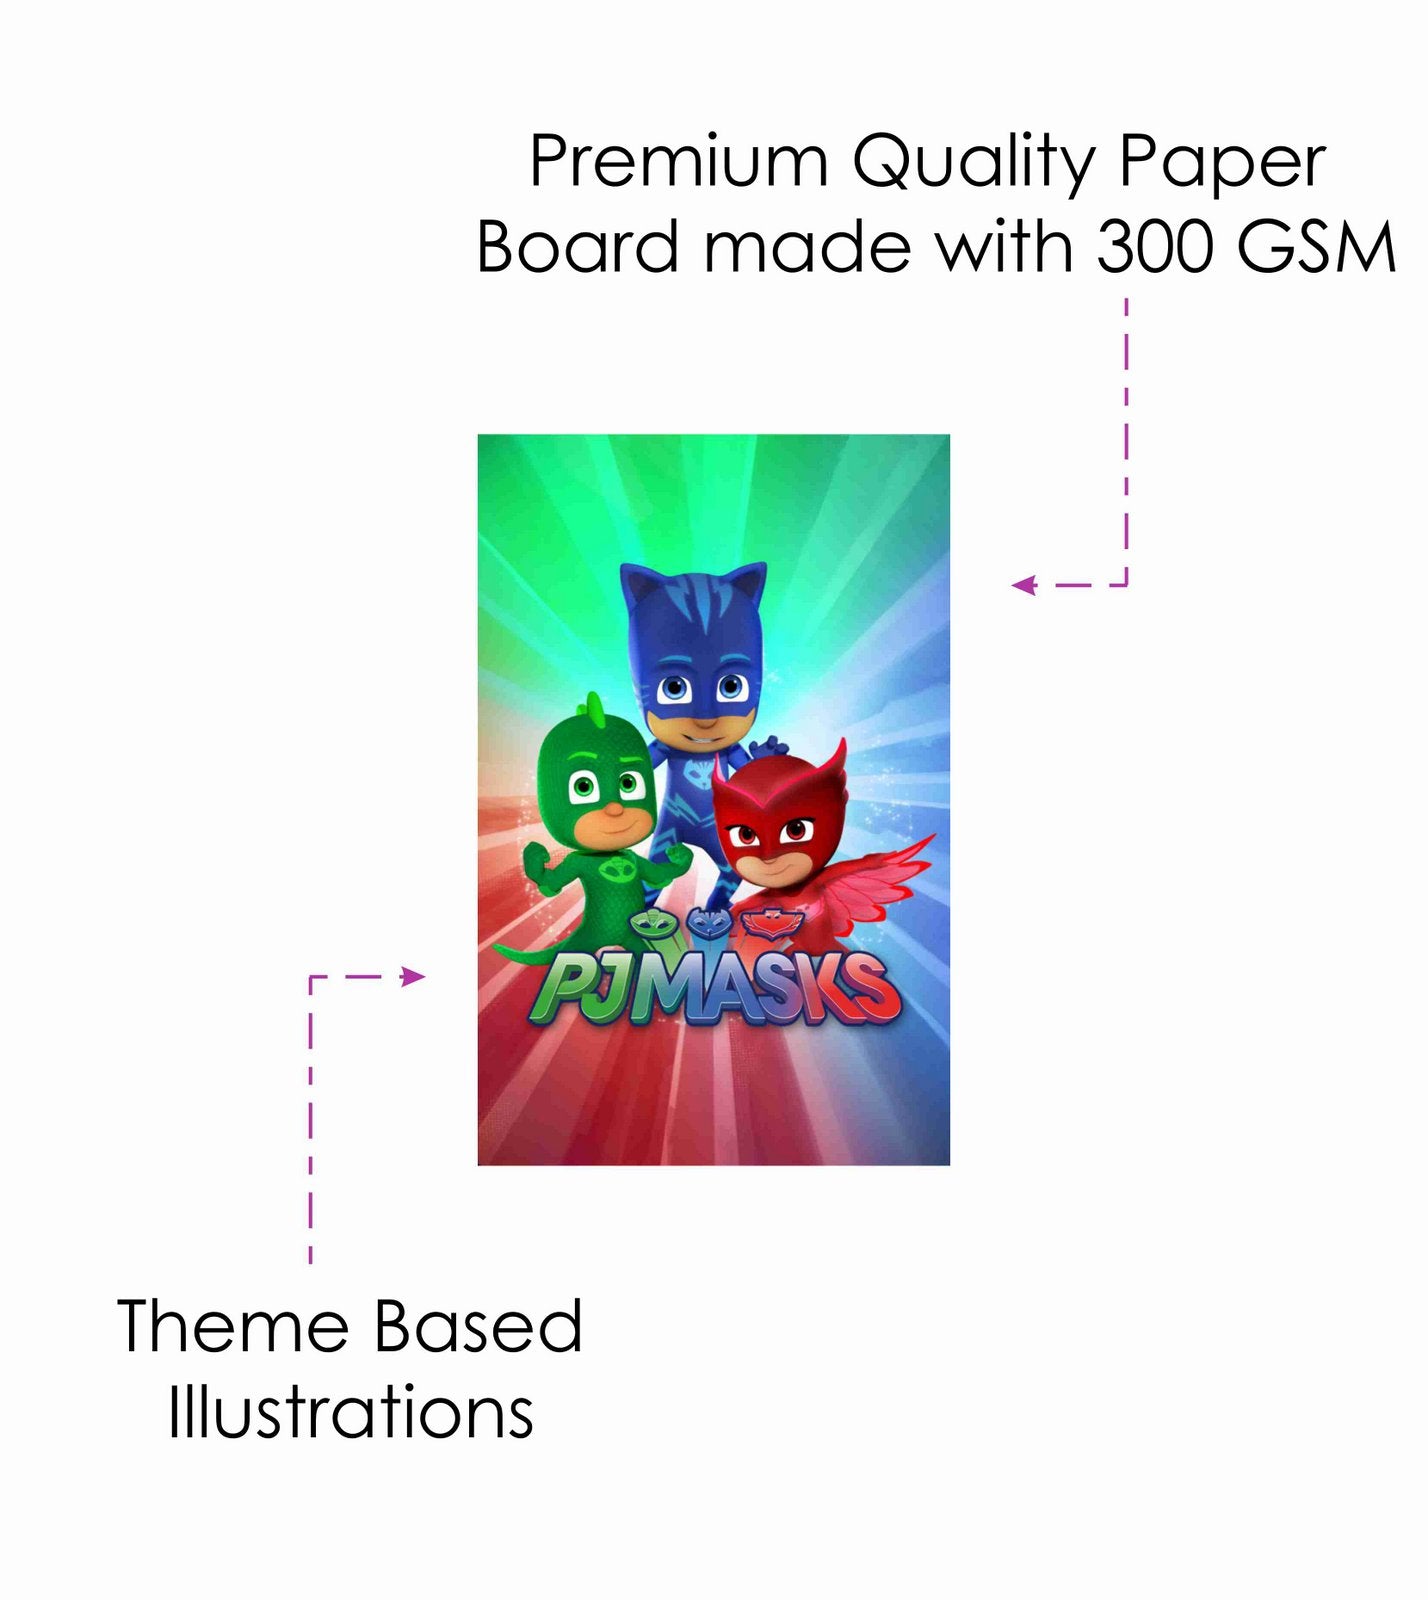 PJ Mask Theme Children's Birthday Party Invitations Cards with Envelopes - Kids Birthday Party Invitations for Boys or Girls,- Invitation Cards (Pack of 10)